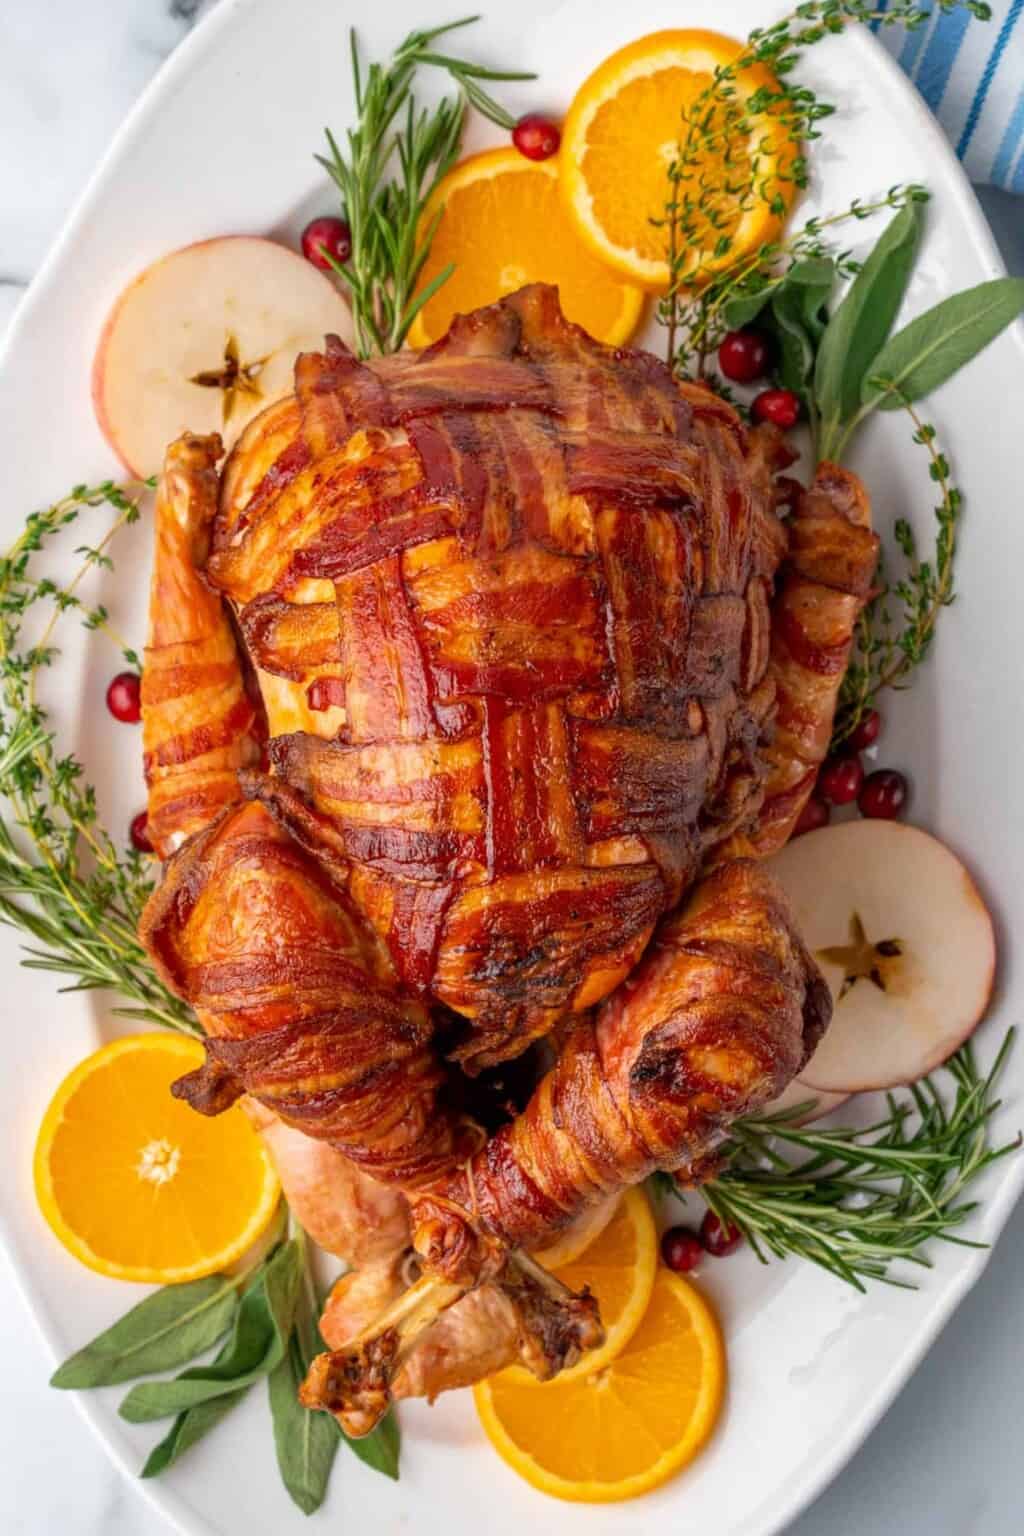 Bacon-Wrapped Turkey garnished with slices of oranges and apples with herbs on a oval plte